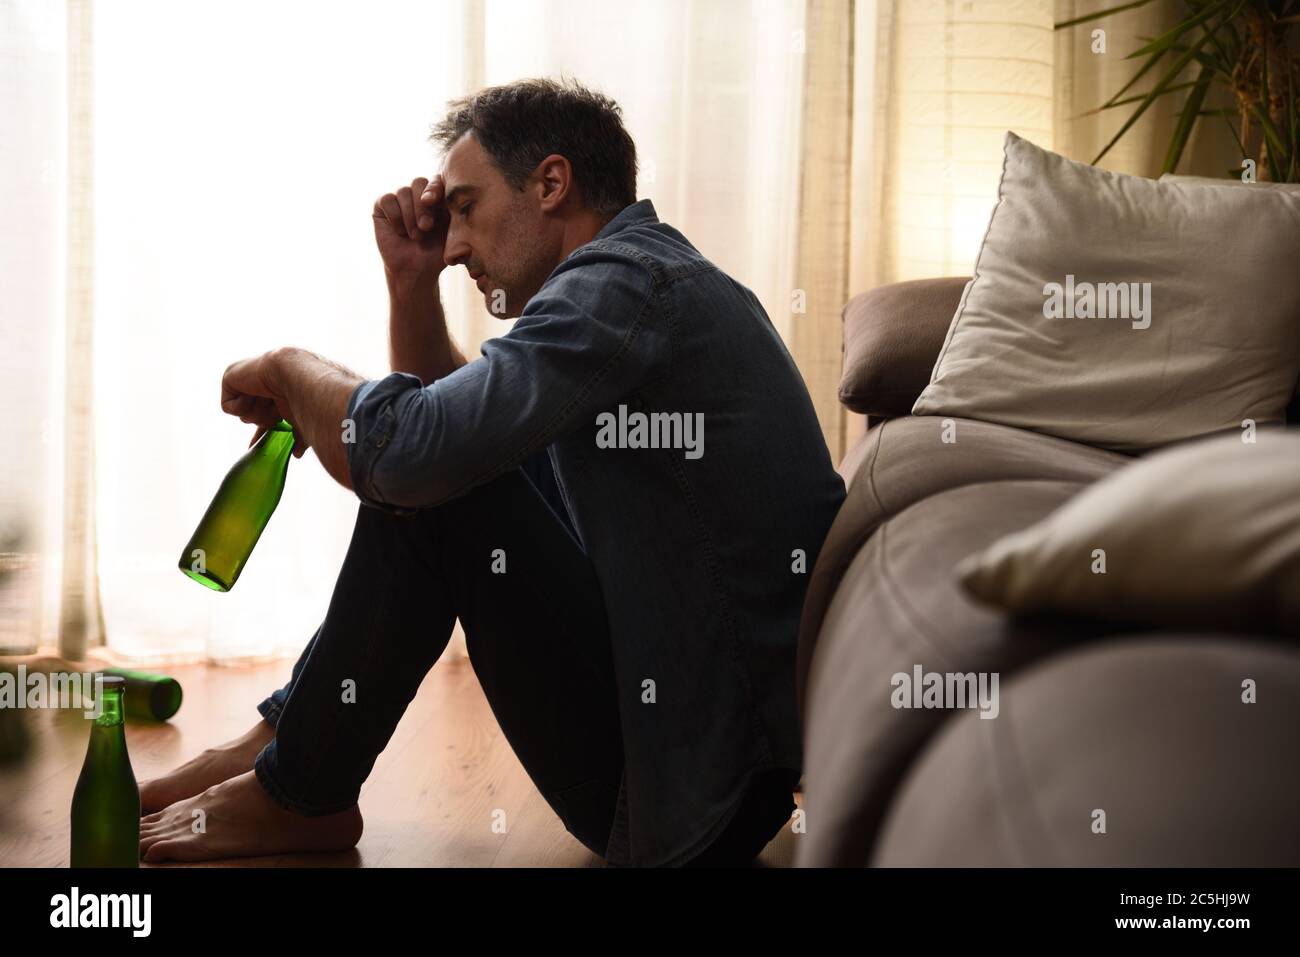 Sad and depressed man sitting in the living room drinking alcohol Stock Photo